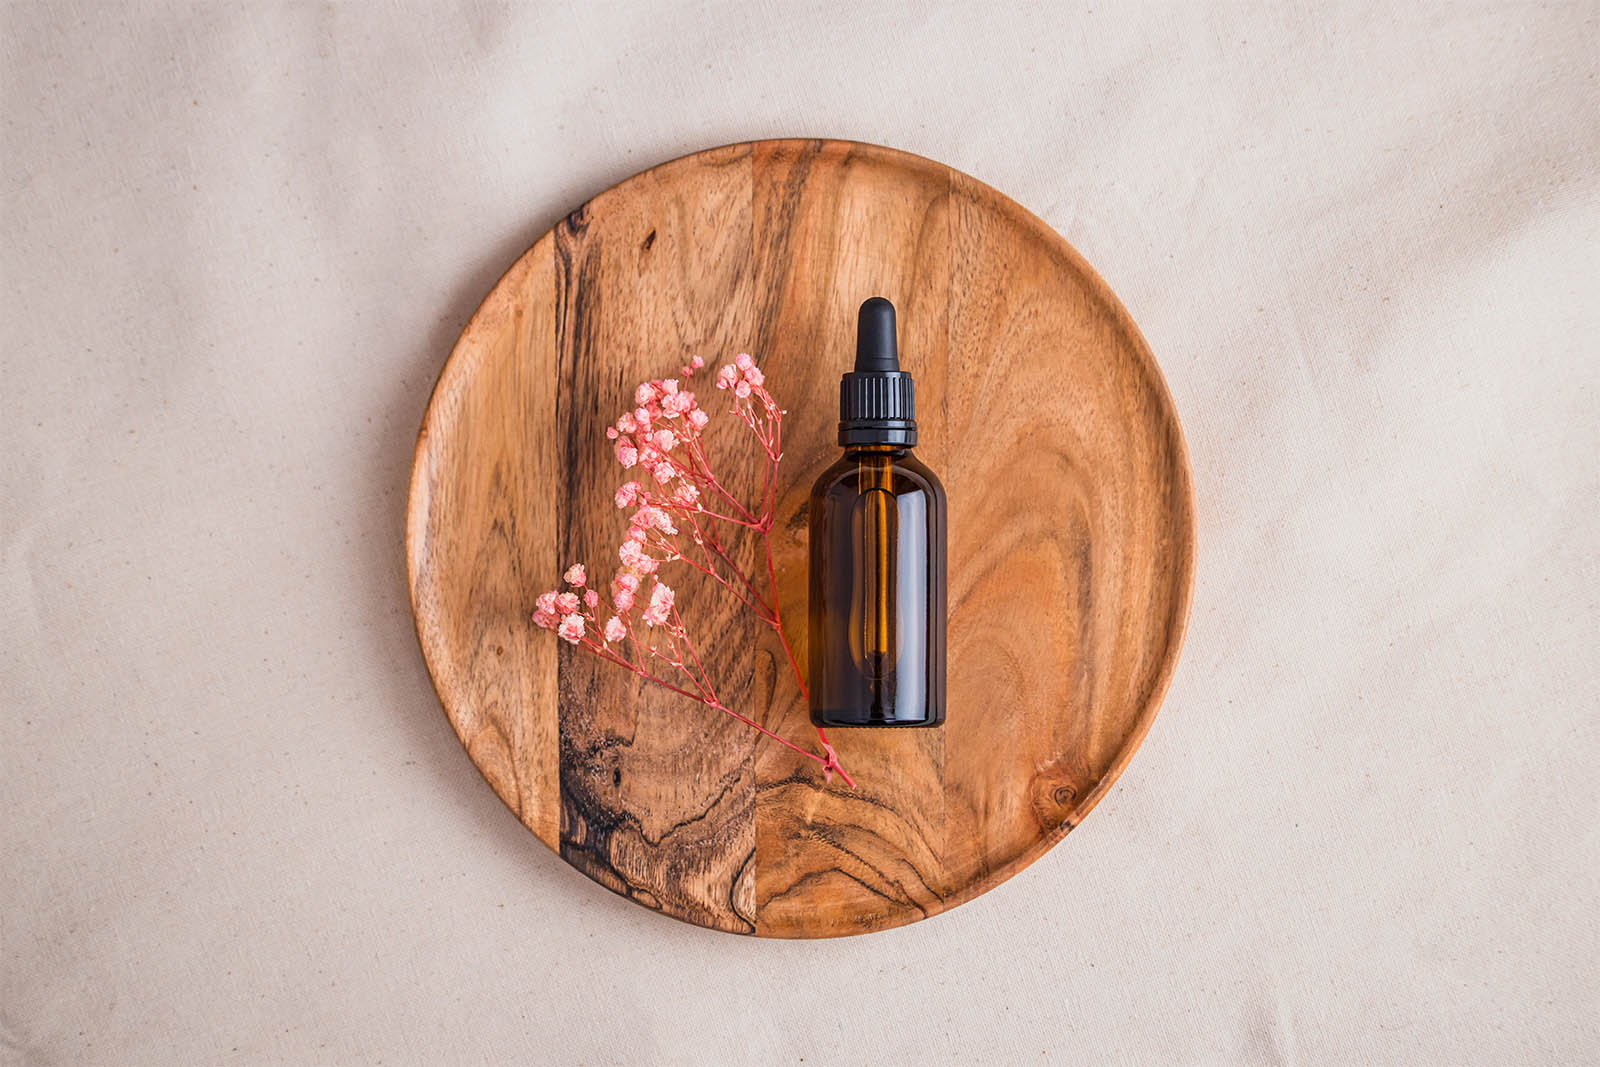 Amber bottle with dried flowers mockup